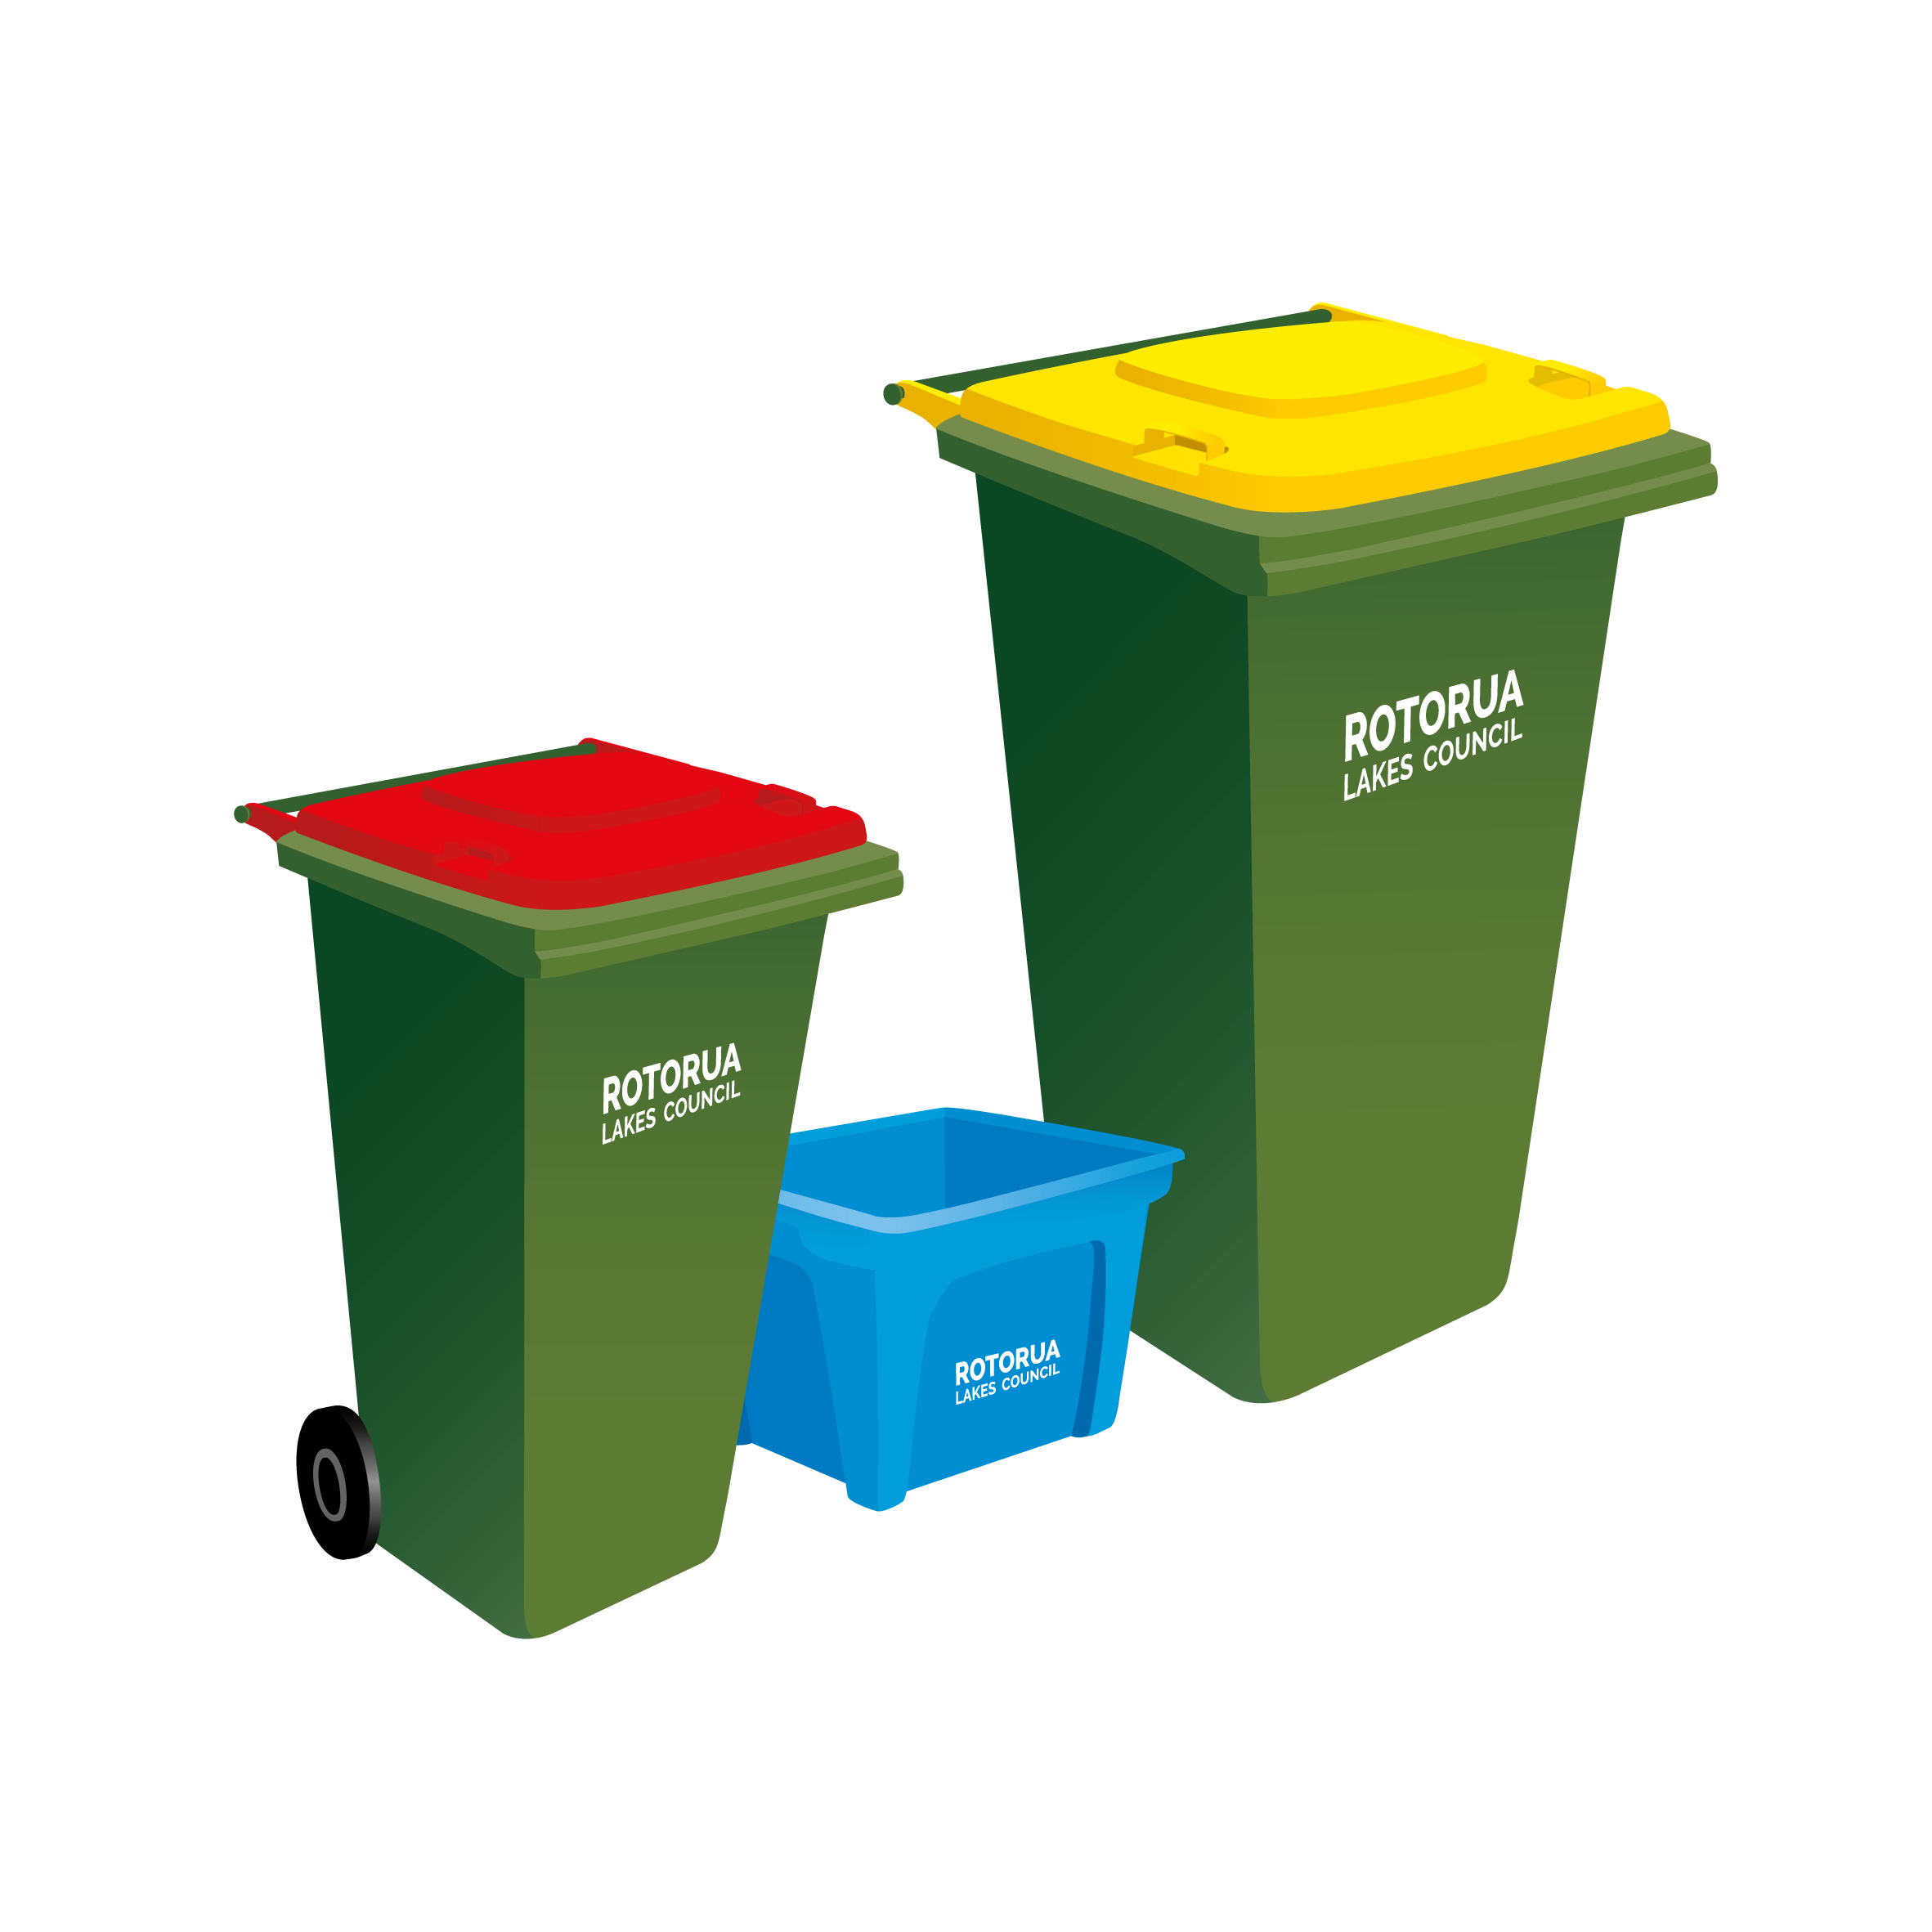 https://www.rotorualakescouncil.nz/repository/libraries/id:2e3idno3317q9sihrv36/hierarchy/our-services/rubbish-and-recycling/bins/publishingimages/200702_RLC%20recycling%20bins%20all_RGB_Middle.png